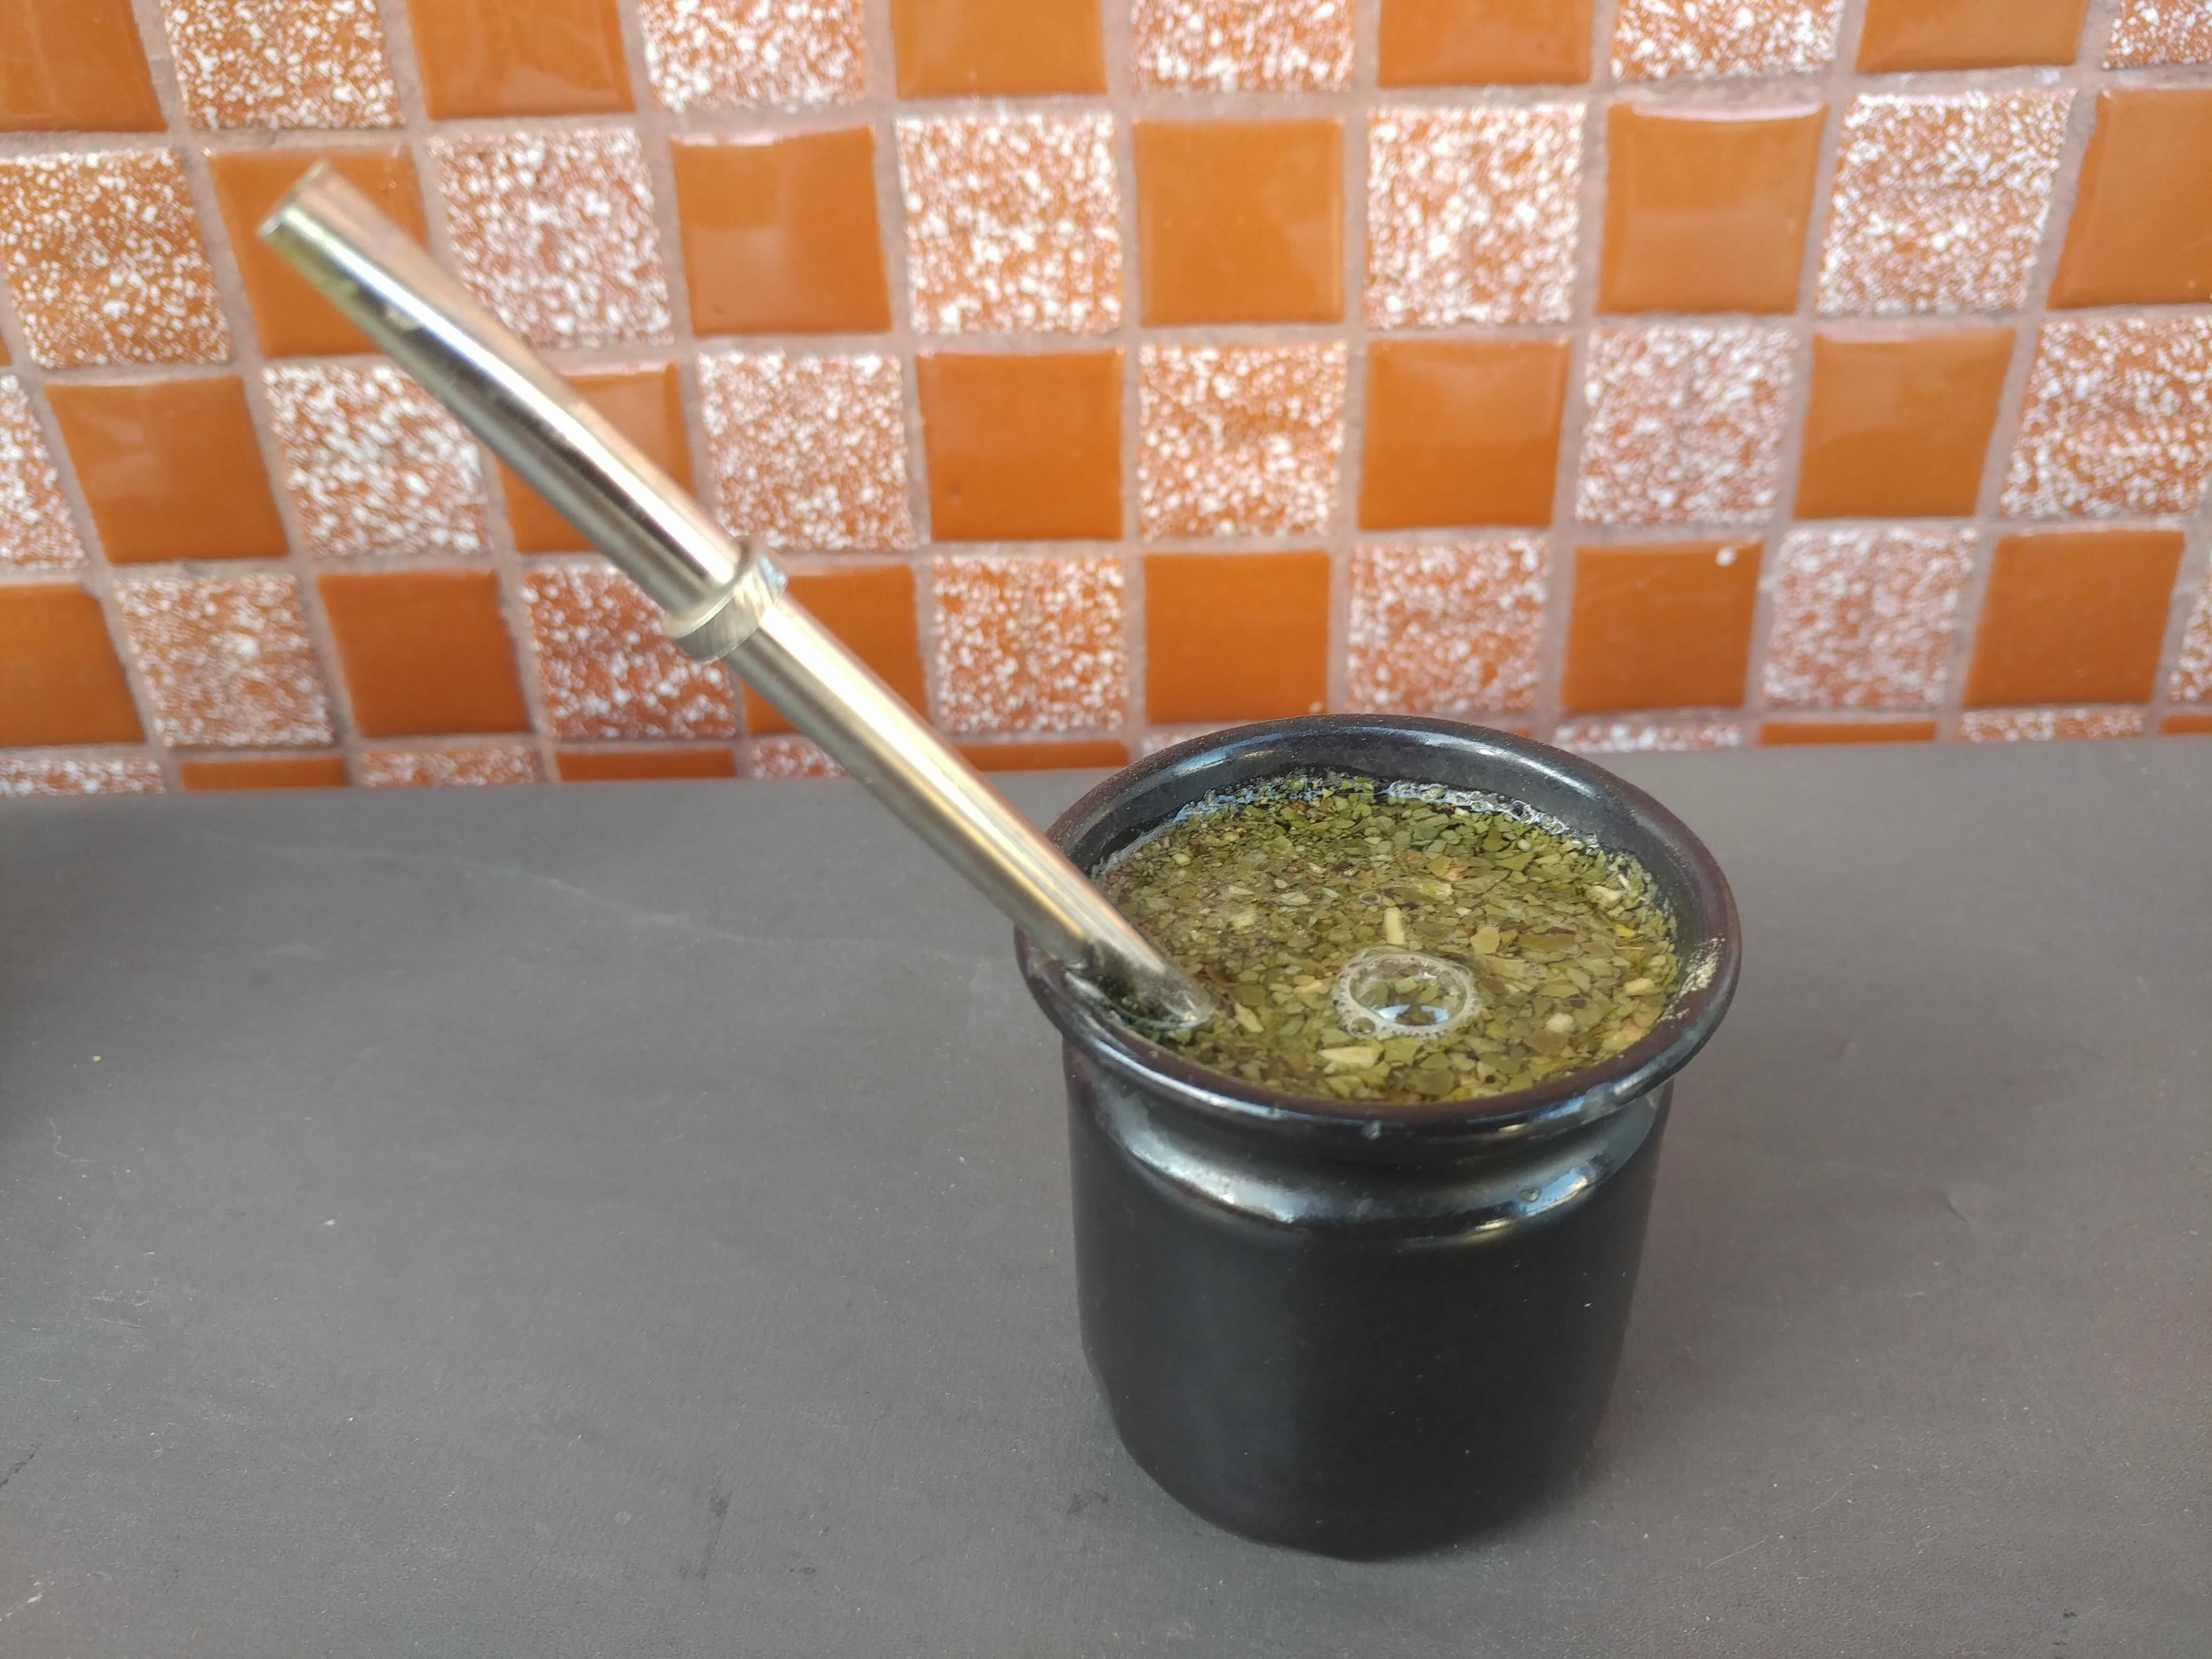 The ritual of mate in Argentina: Don't say thank you (unless you're done)